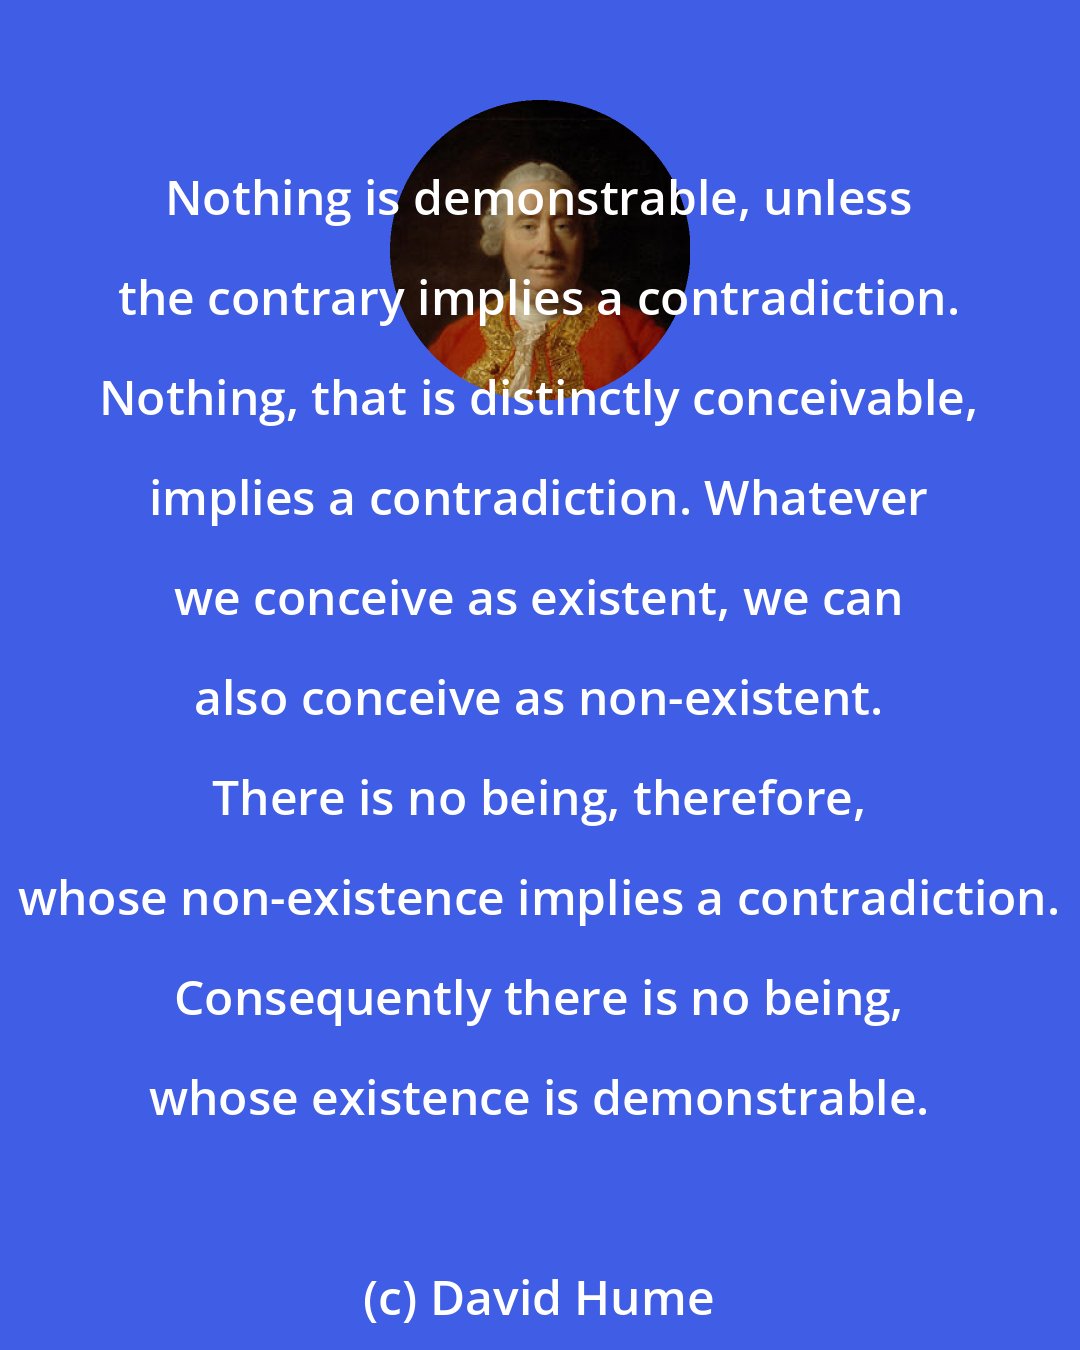 David Hume: Nothing is demonstrable, unless the contrary implies a contradiction. Nothing, that is distinctly conceivable, implies a contradiction. Whatever we conceive as existent, we can also conceive as non-existent. There is no being, therefore, whose non-existence implies a contradiction. Consequently there is no being, whose existence is demonstrable.